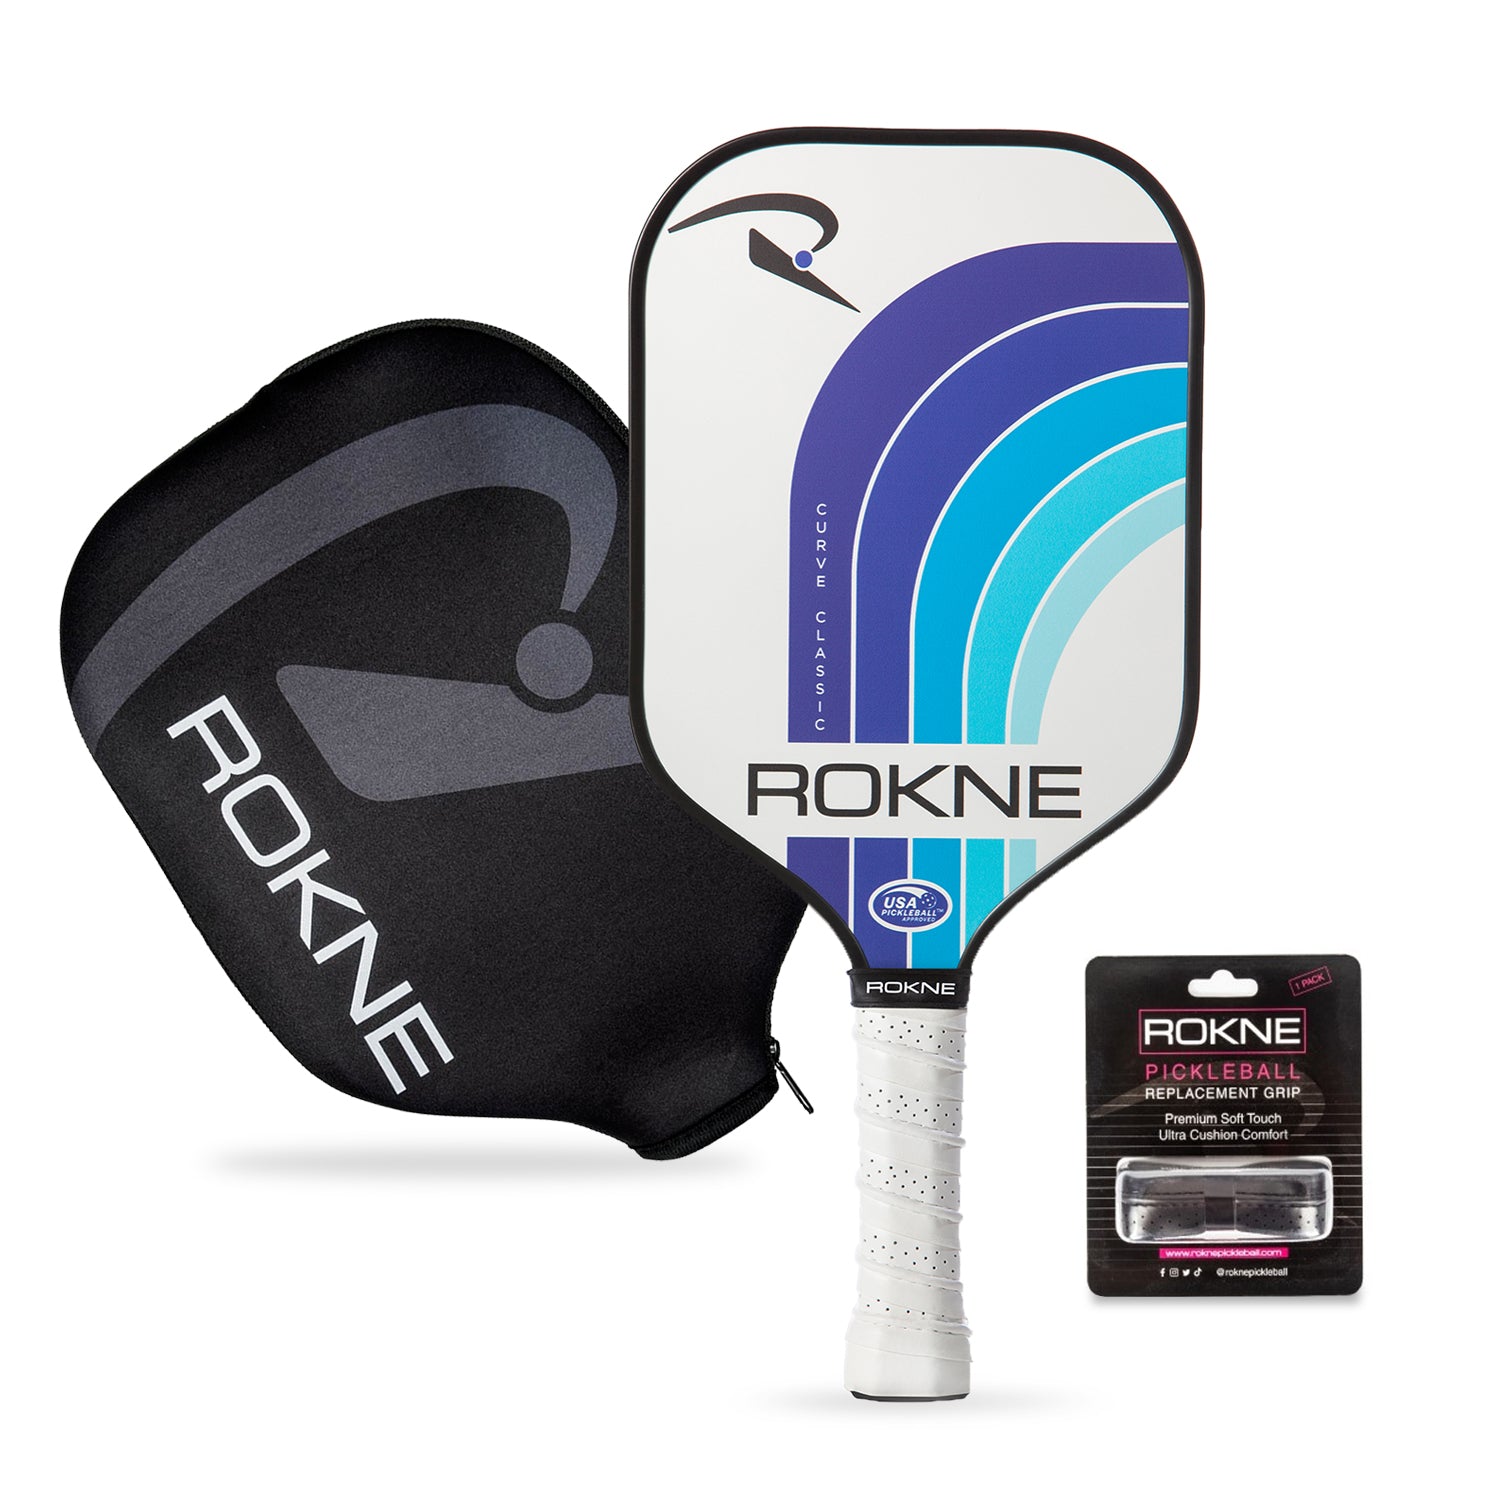 ROKNE Curve Classic Pickleball Paddle - Deep Sea (Paddle Cover & Replacement Grip Included)